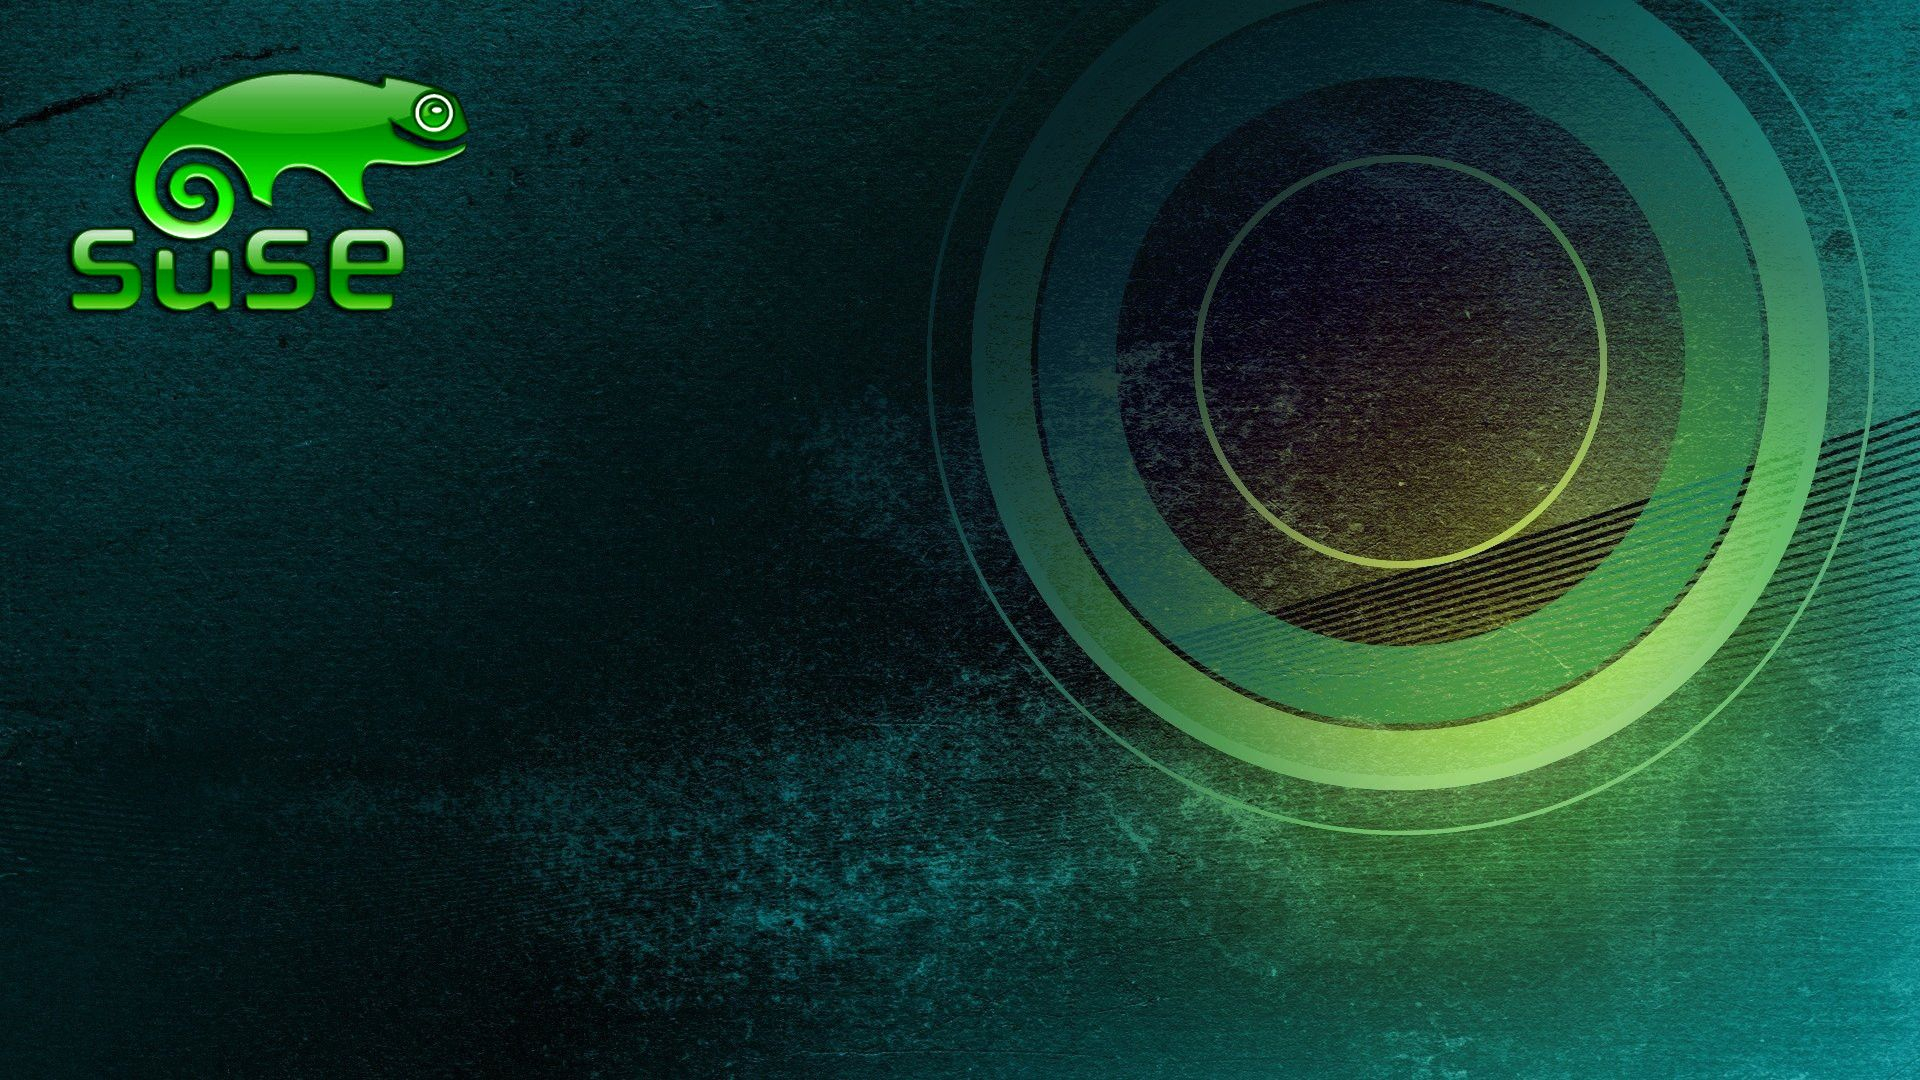 1920x1080 Free download opensuse wallpaper HD [] for your Desktop, Mobile \u0026 Tablet | Explore 69+ Open Suse Wallpaper | Suse Wallpaper, HD Linux Wallpaper Download, openSUSE Wallpaper 13